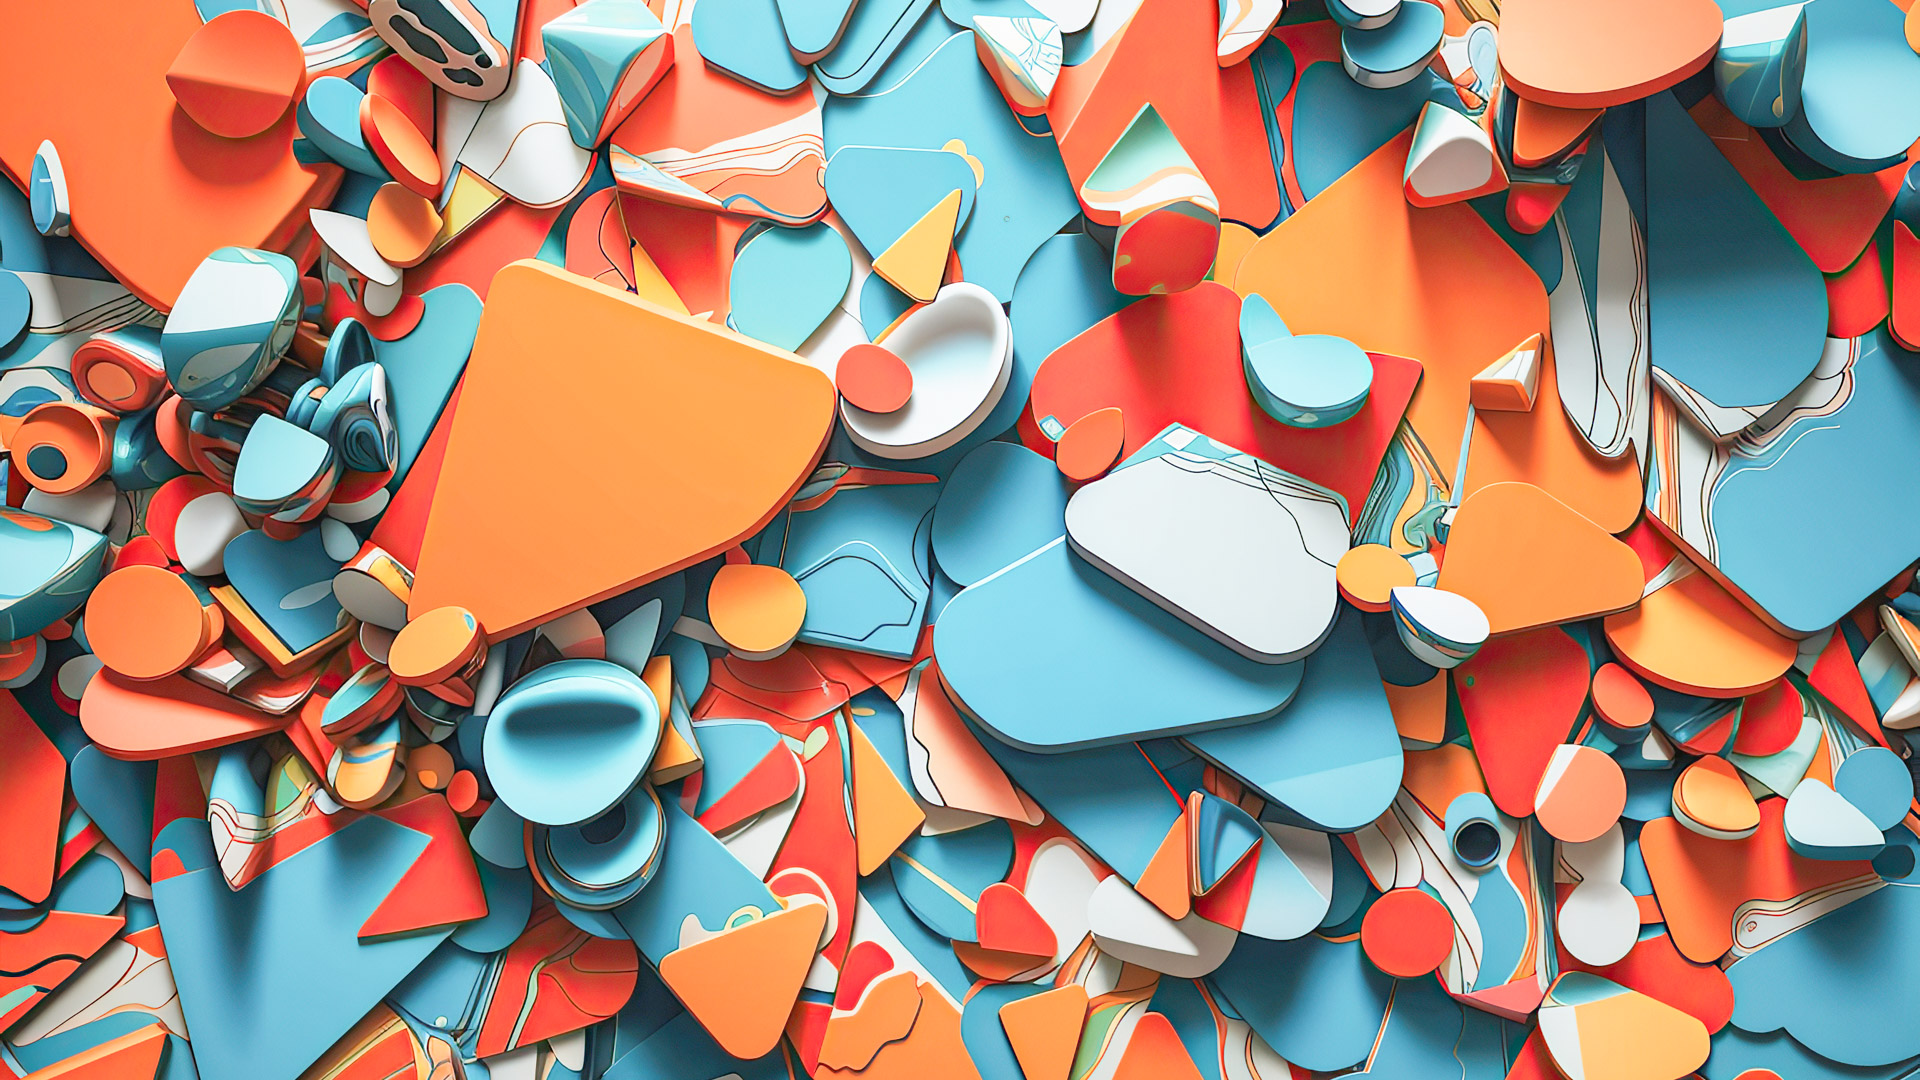 Immerse yourself in the vivid hues of our colorful abstract wallpaper HD, featuring striking orange and teal tones.